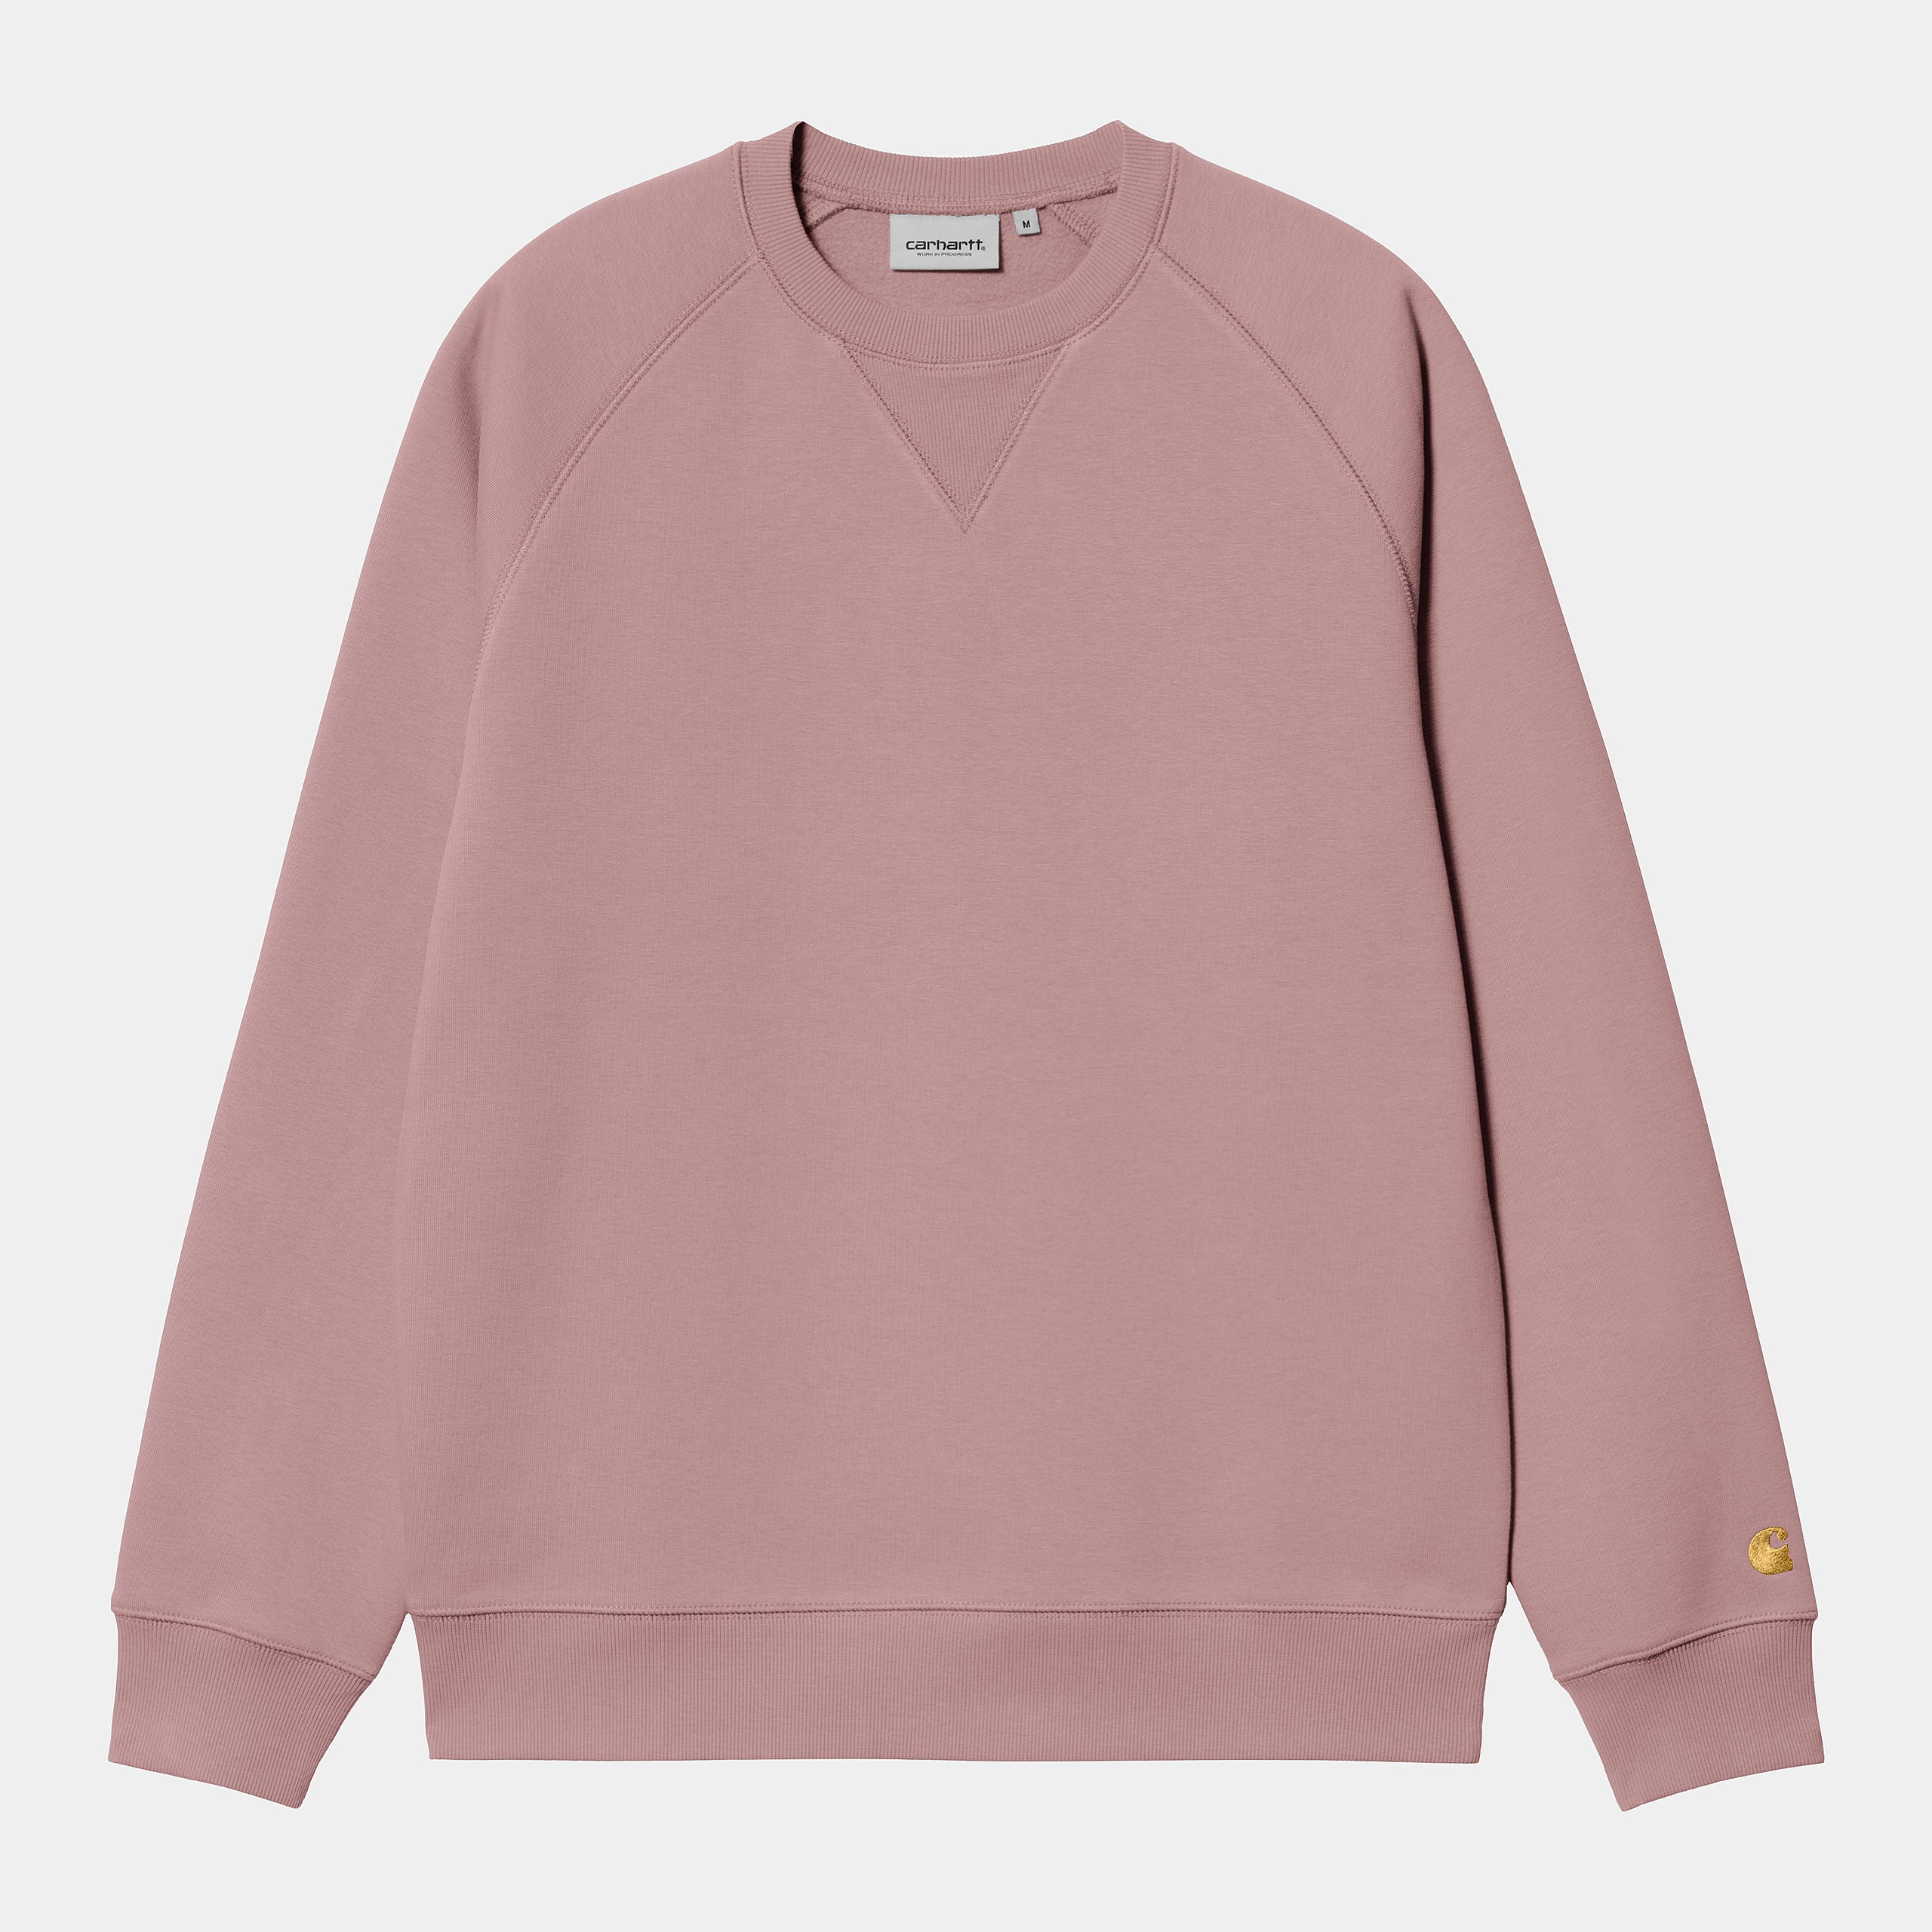 chase-sweat-glassy-pink-gold-75_png.jpg